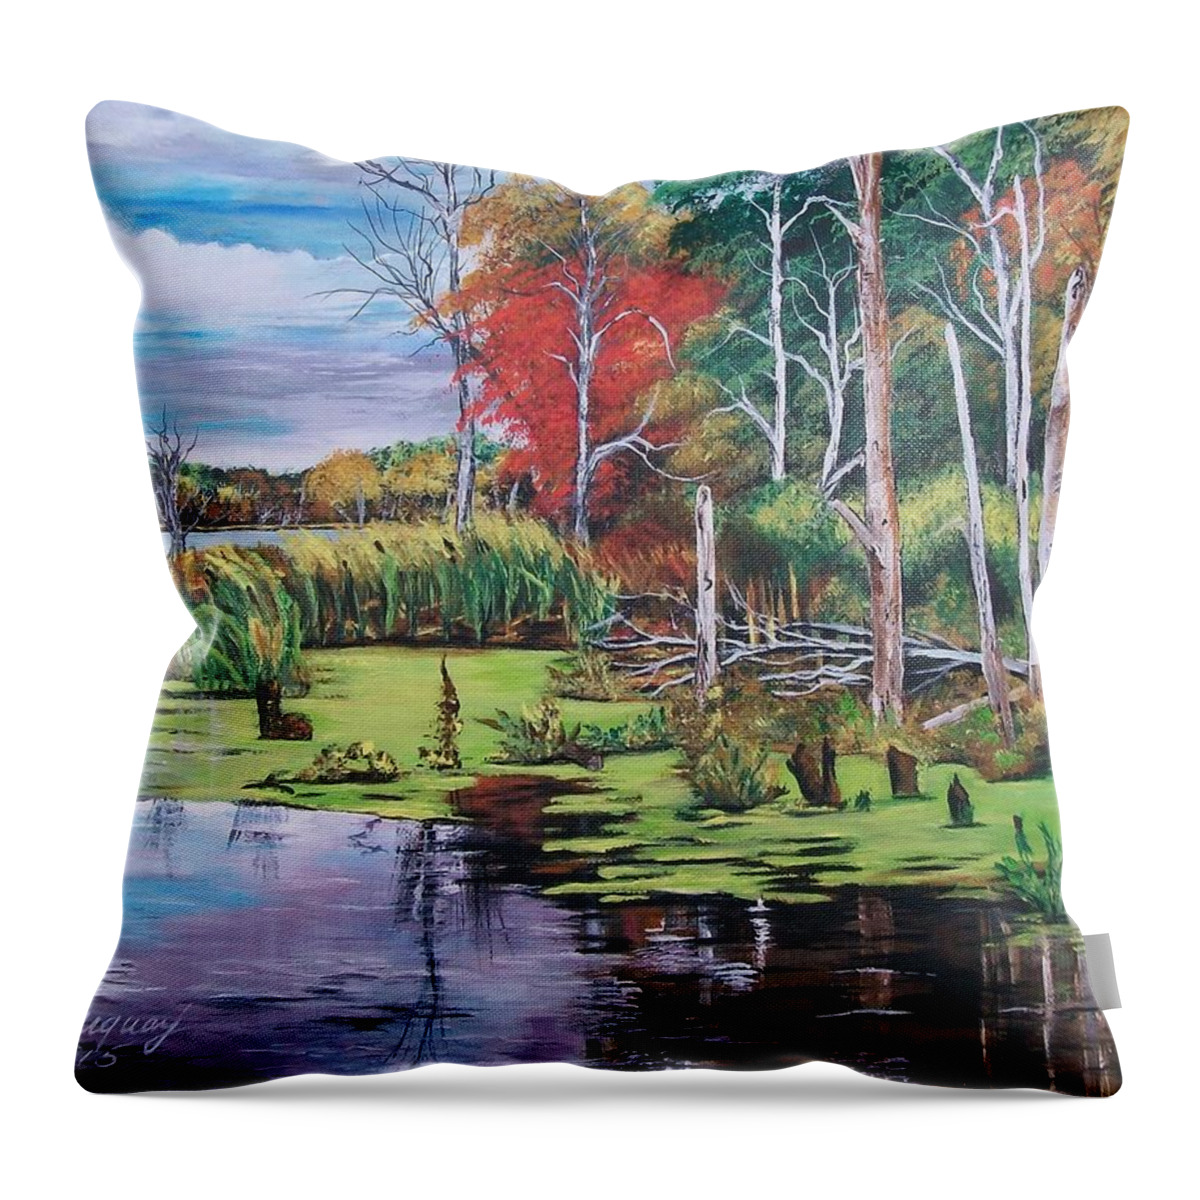 Sedge Throw Pillow featuring the painting Norman Lake by Sharon Duguay